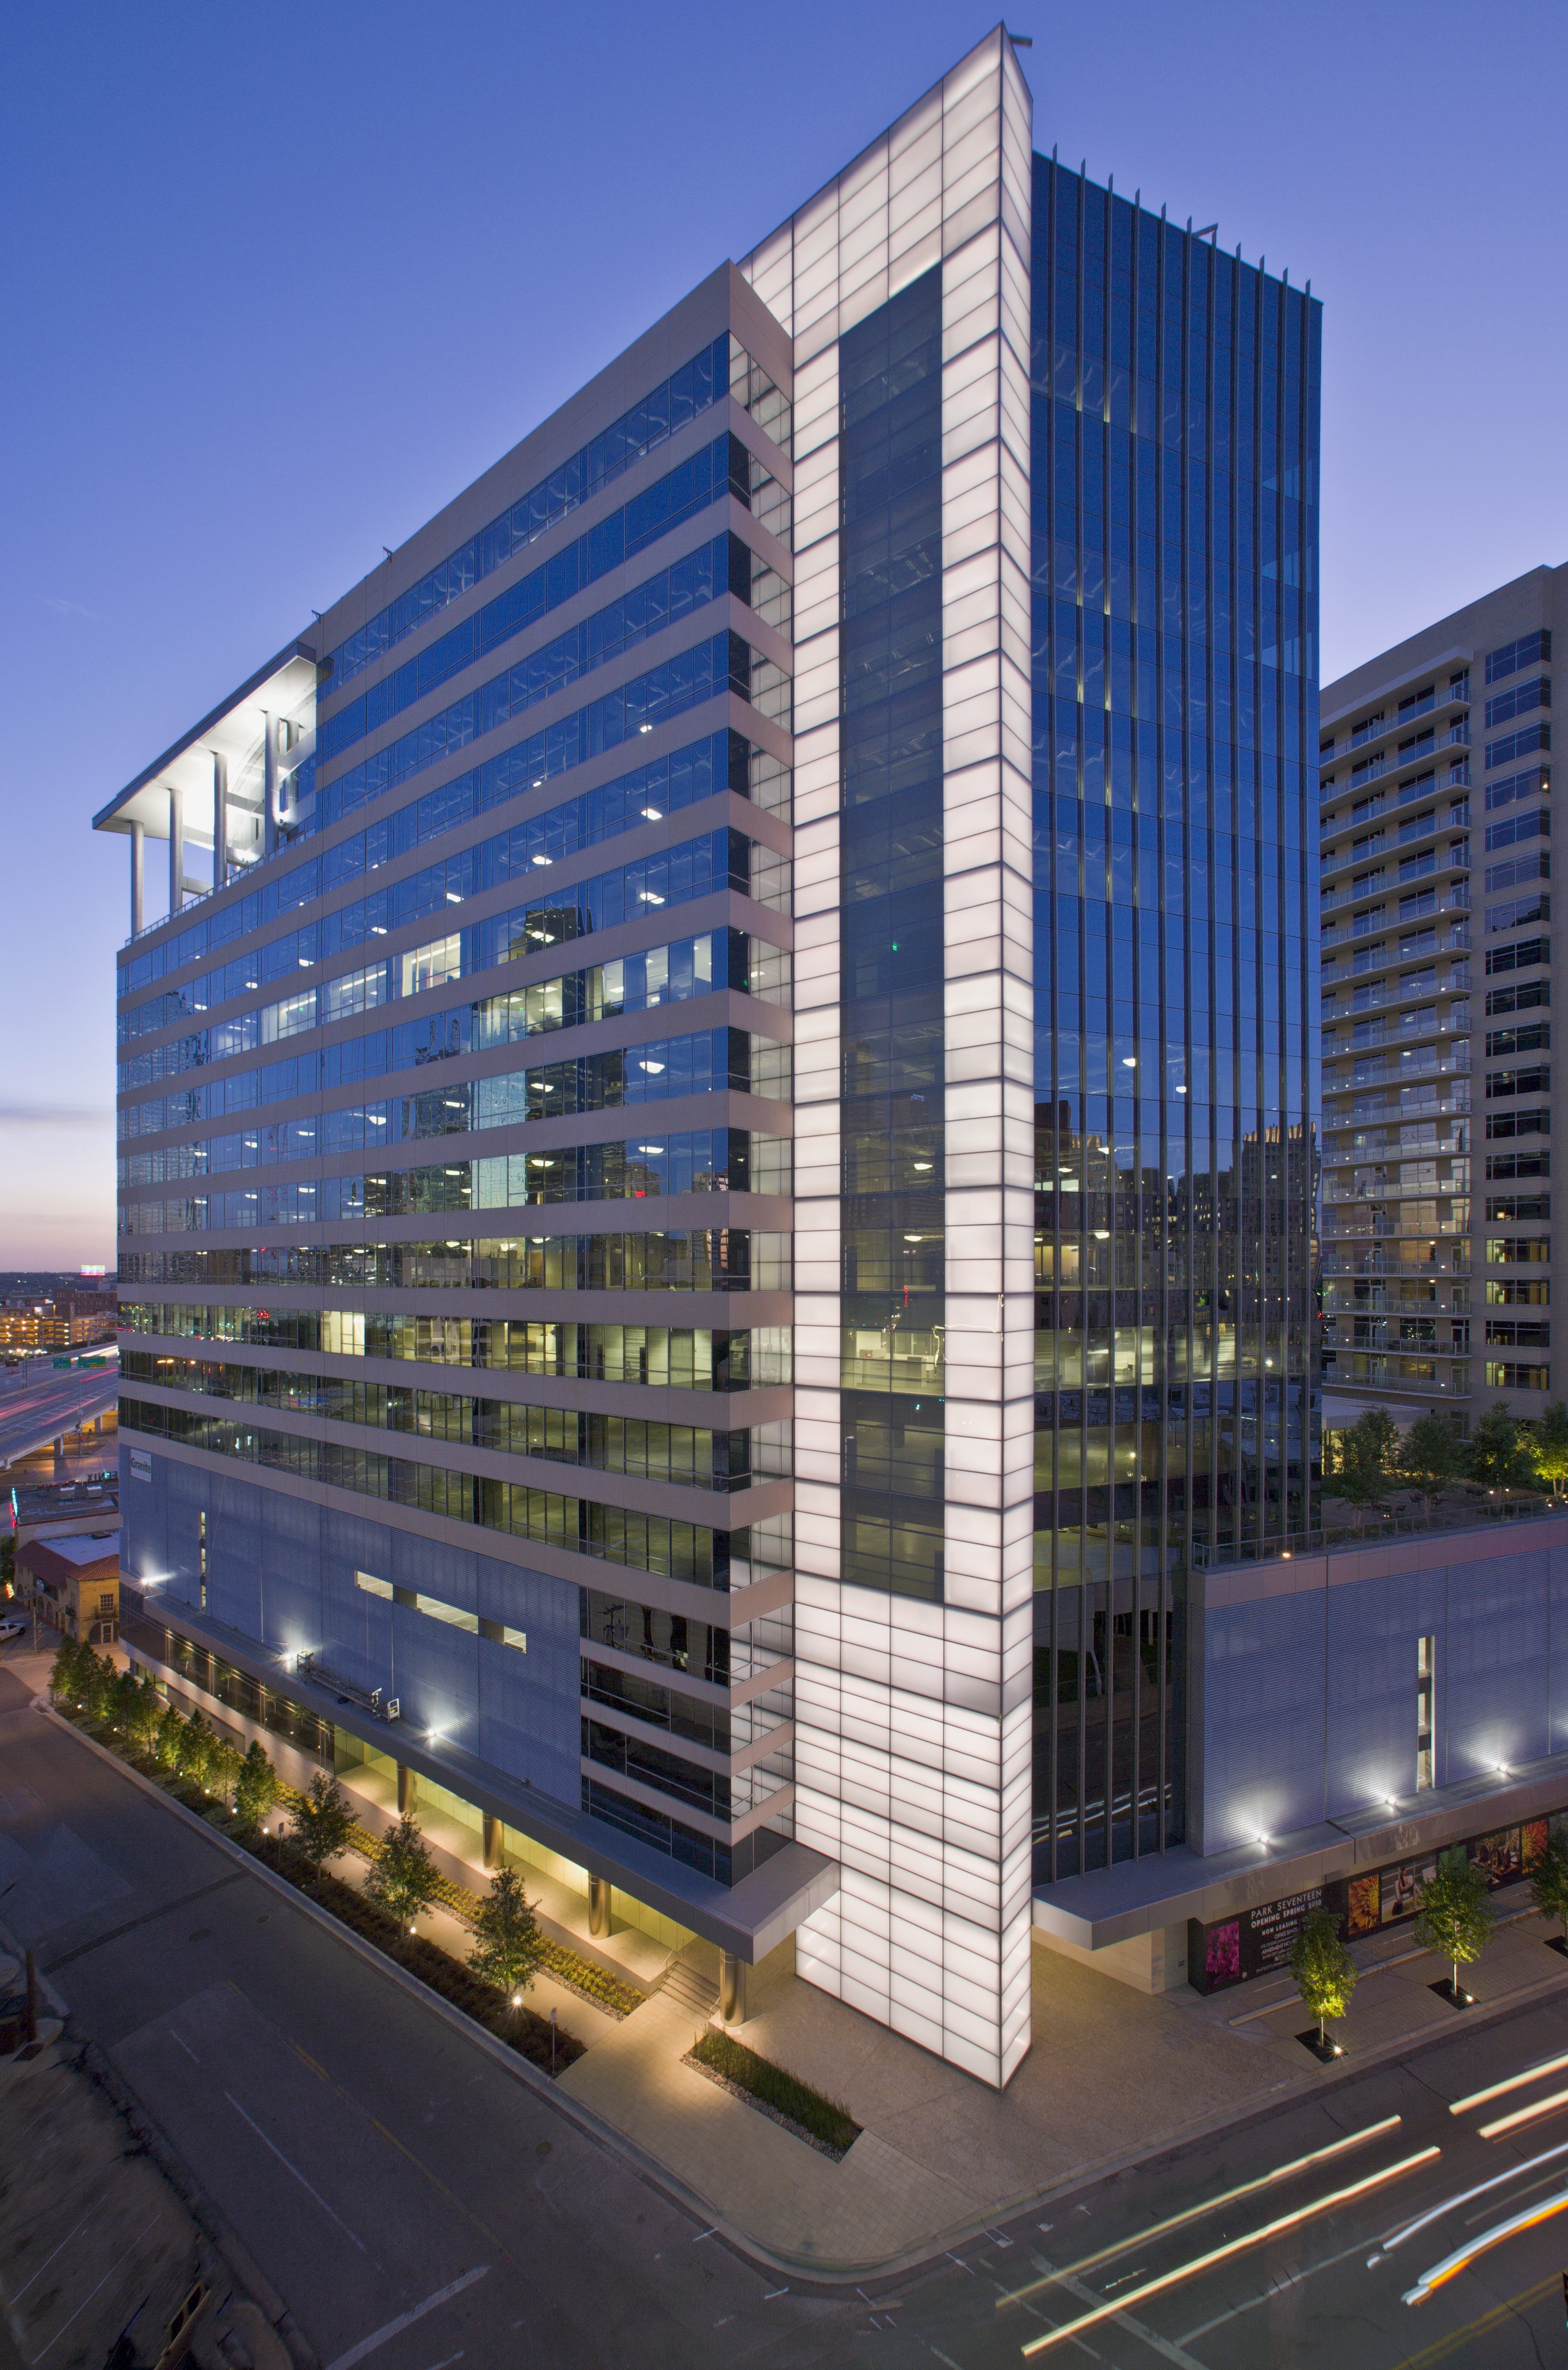 Tower sale in Dallas' Uptown expected to shatter price records ...